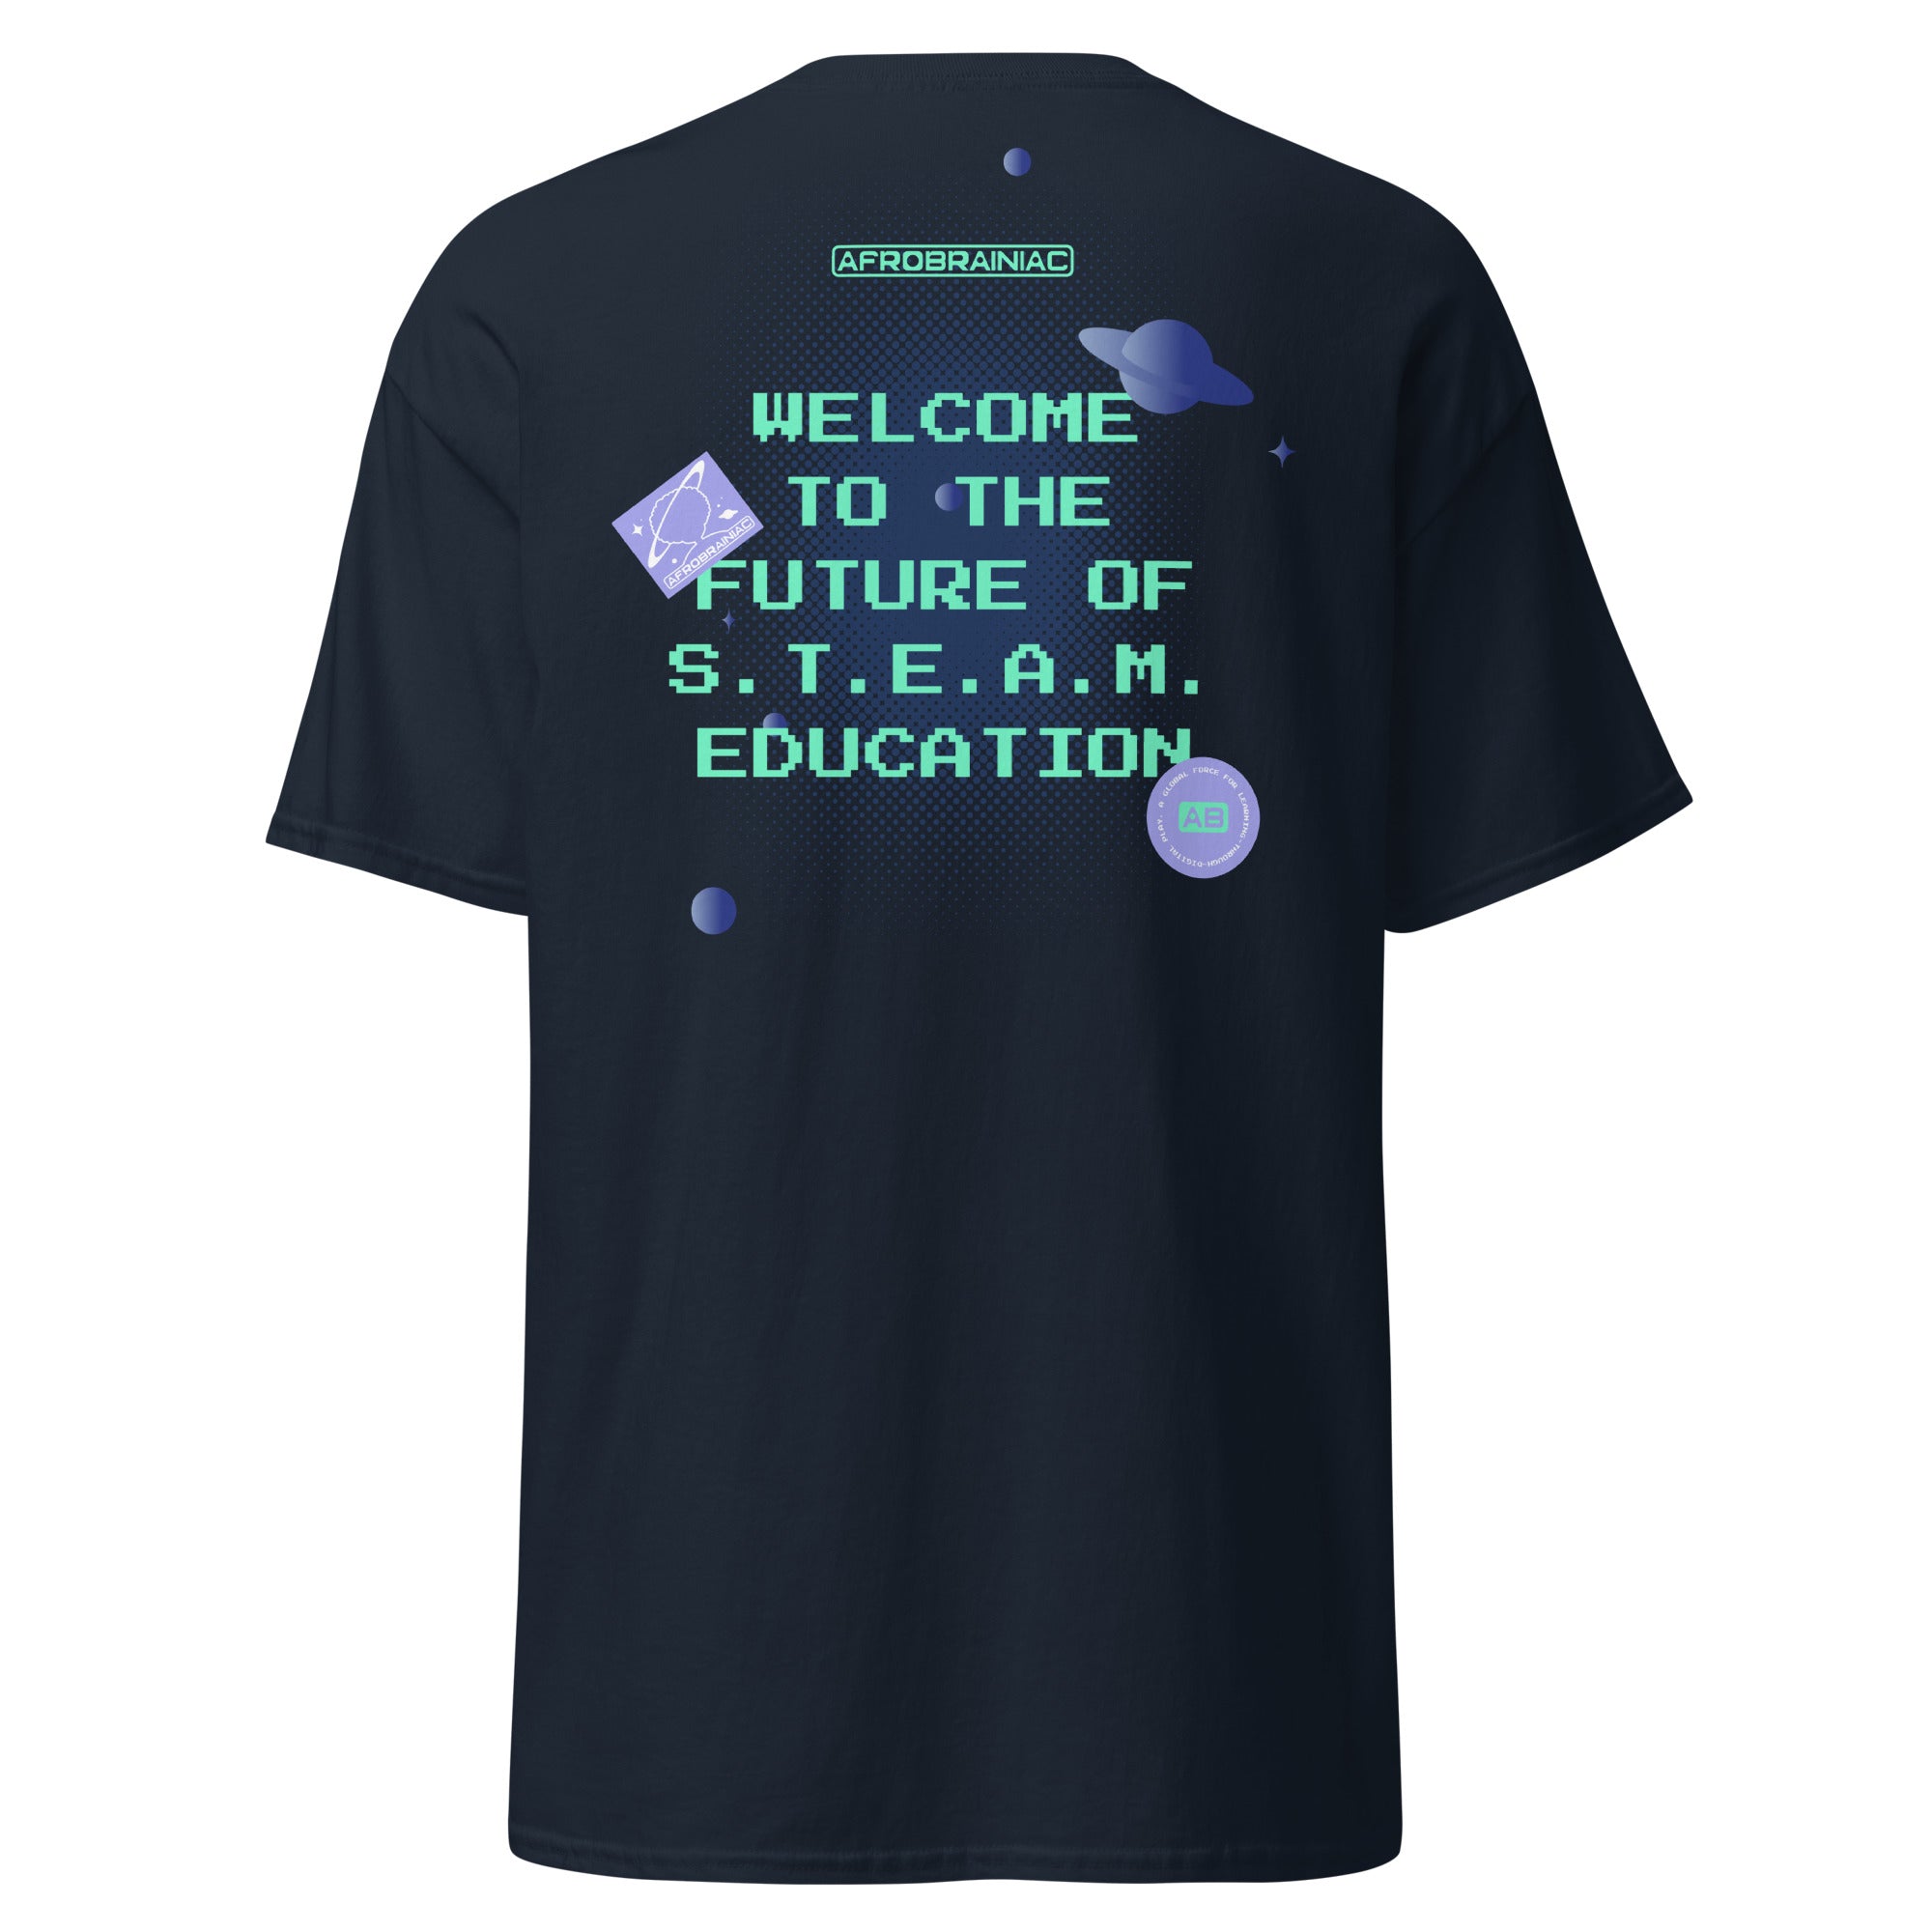 AB "Welcome to Future" Unisex Adult T-Shirt - LIMITED